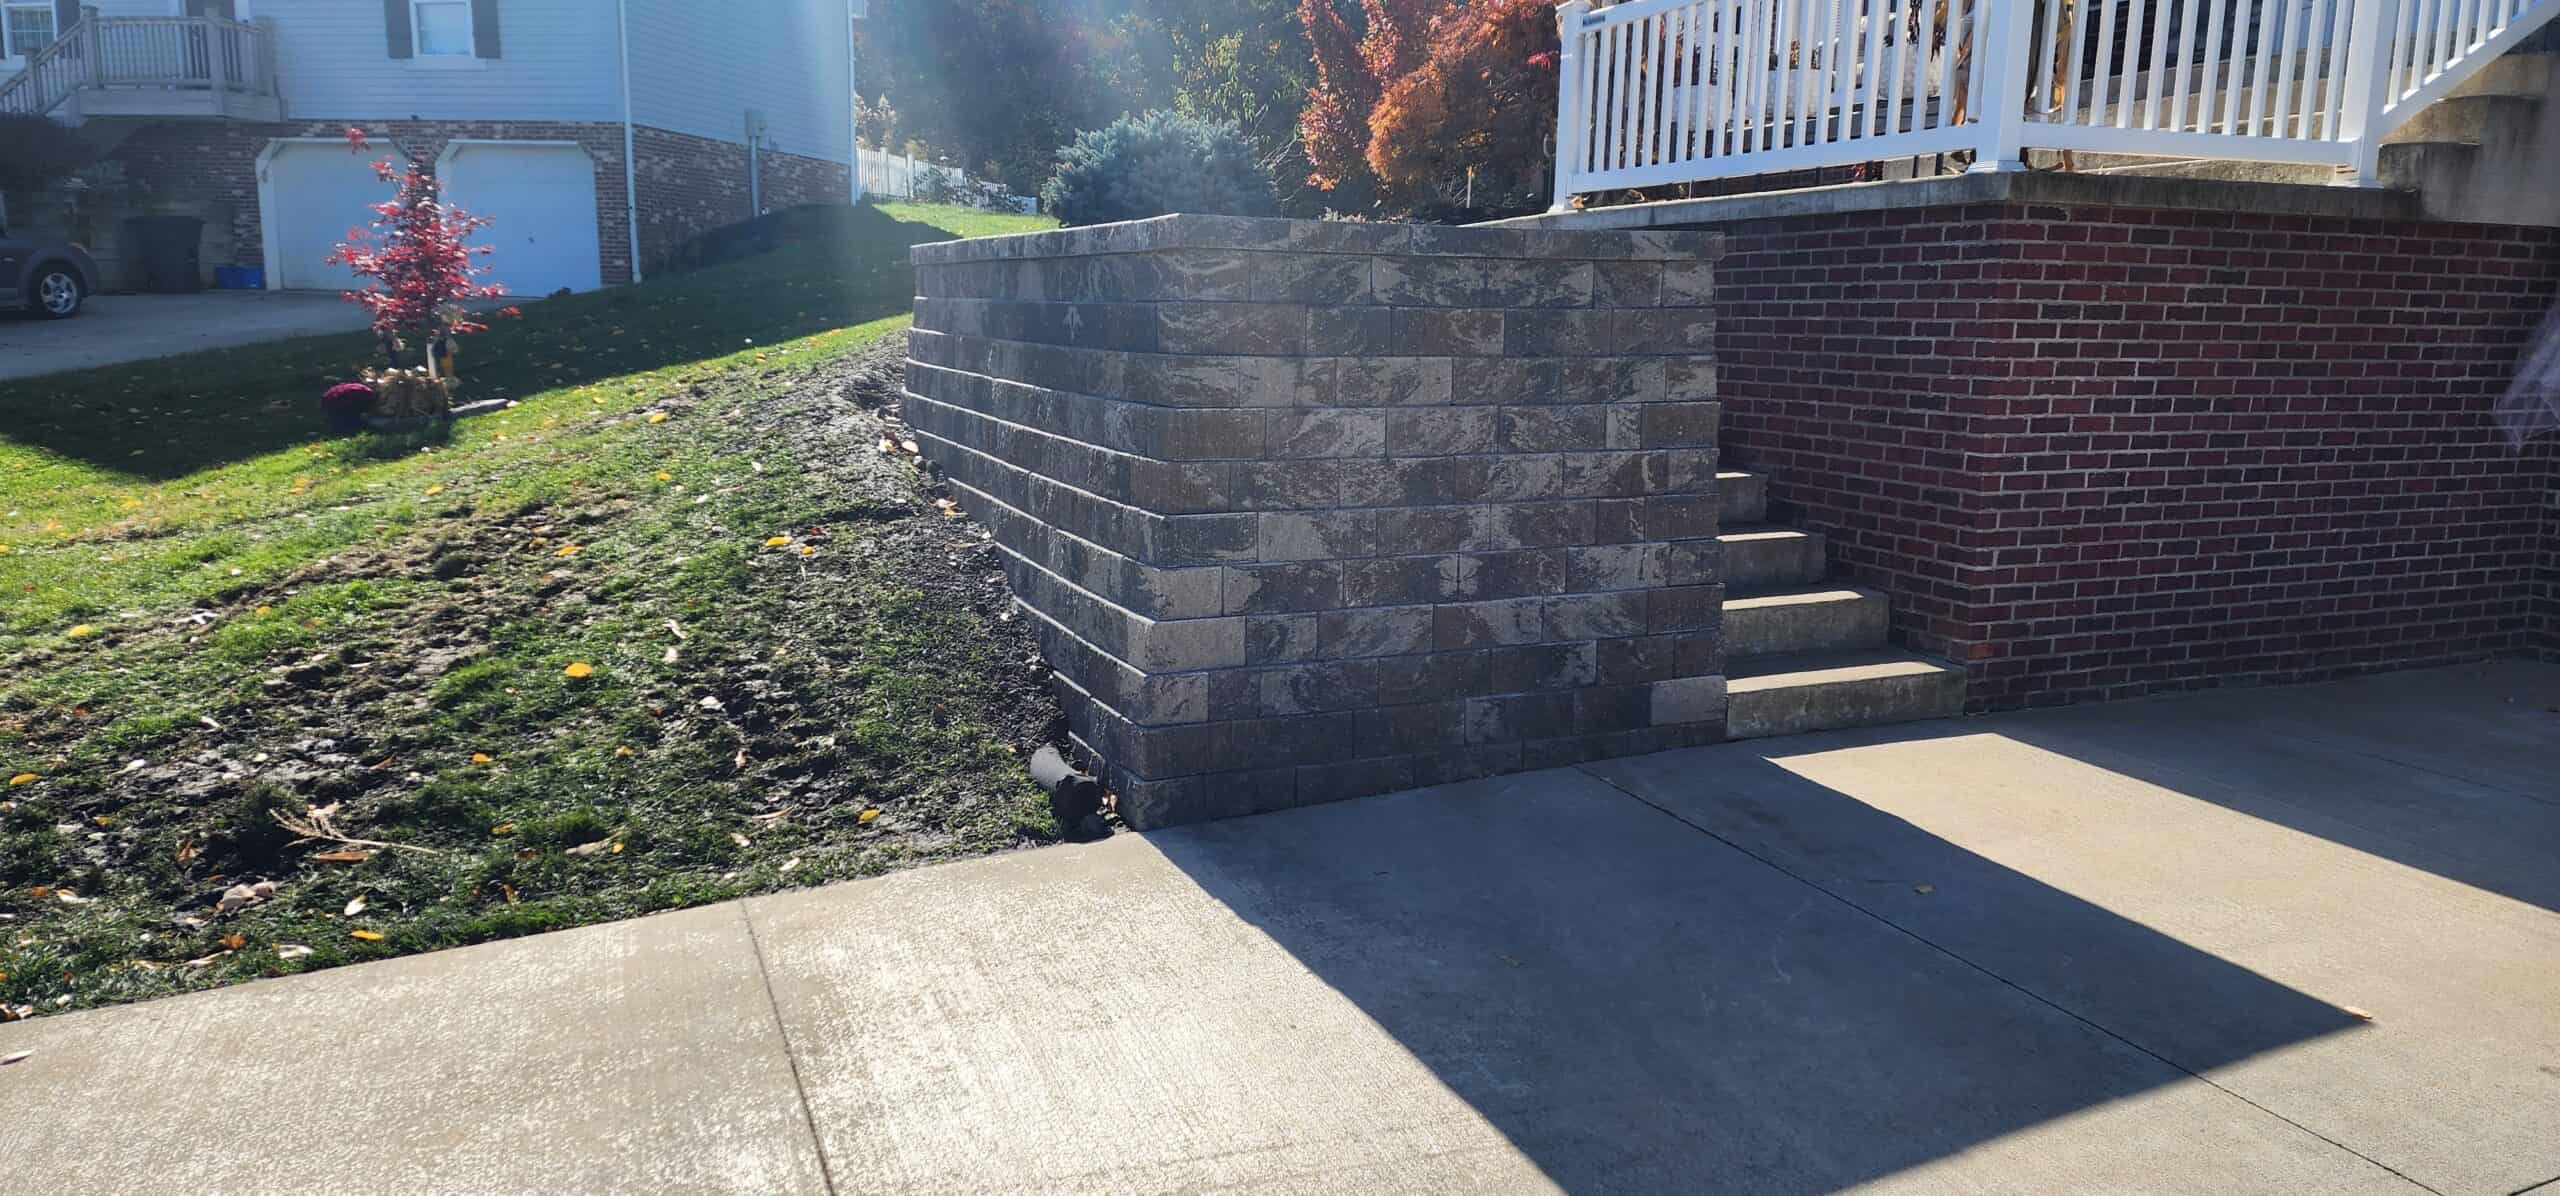 Retaining walls improves the look and aesthetic of your outdoor space. Call Lawns & Beyond to upgrade your Zelienople, Wexford, or Cranberry Township property!